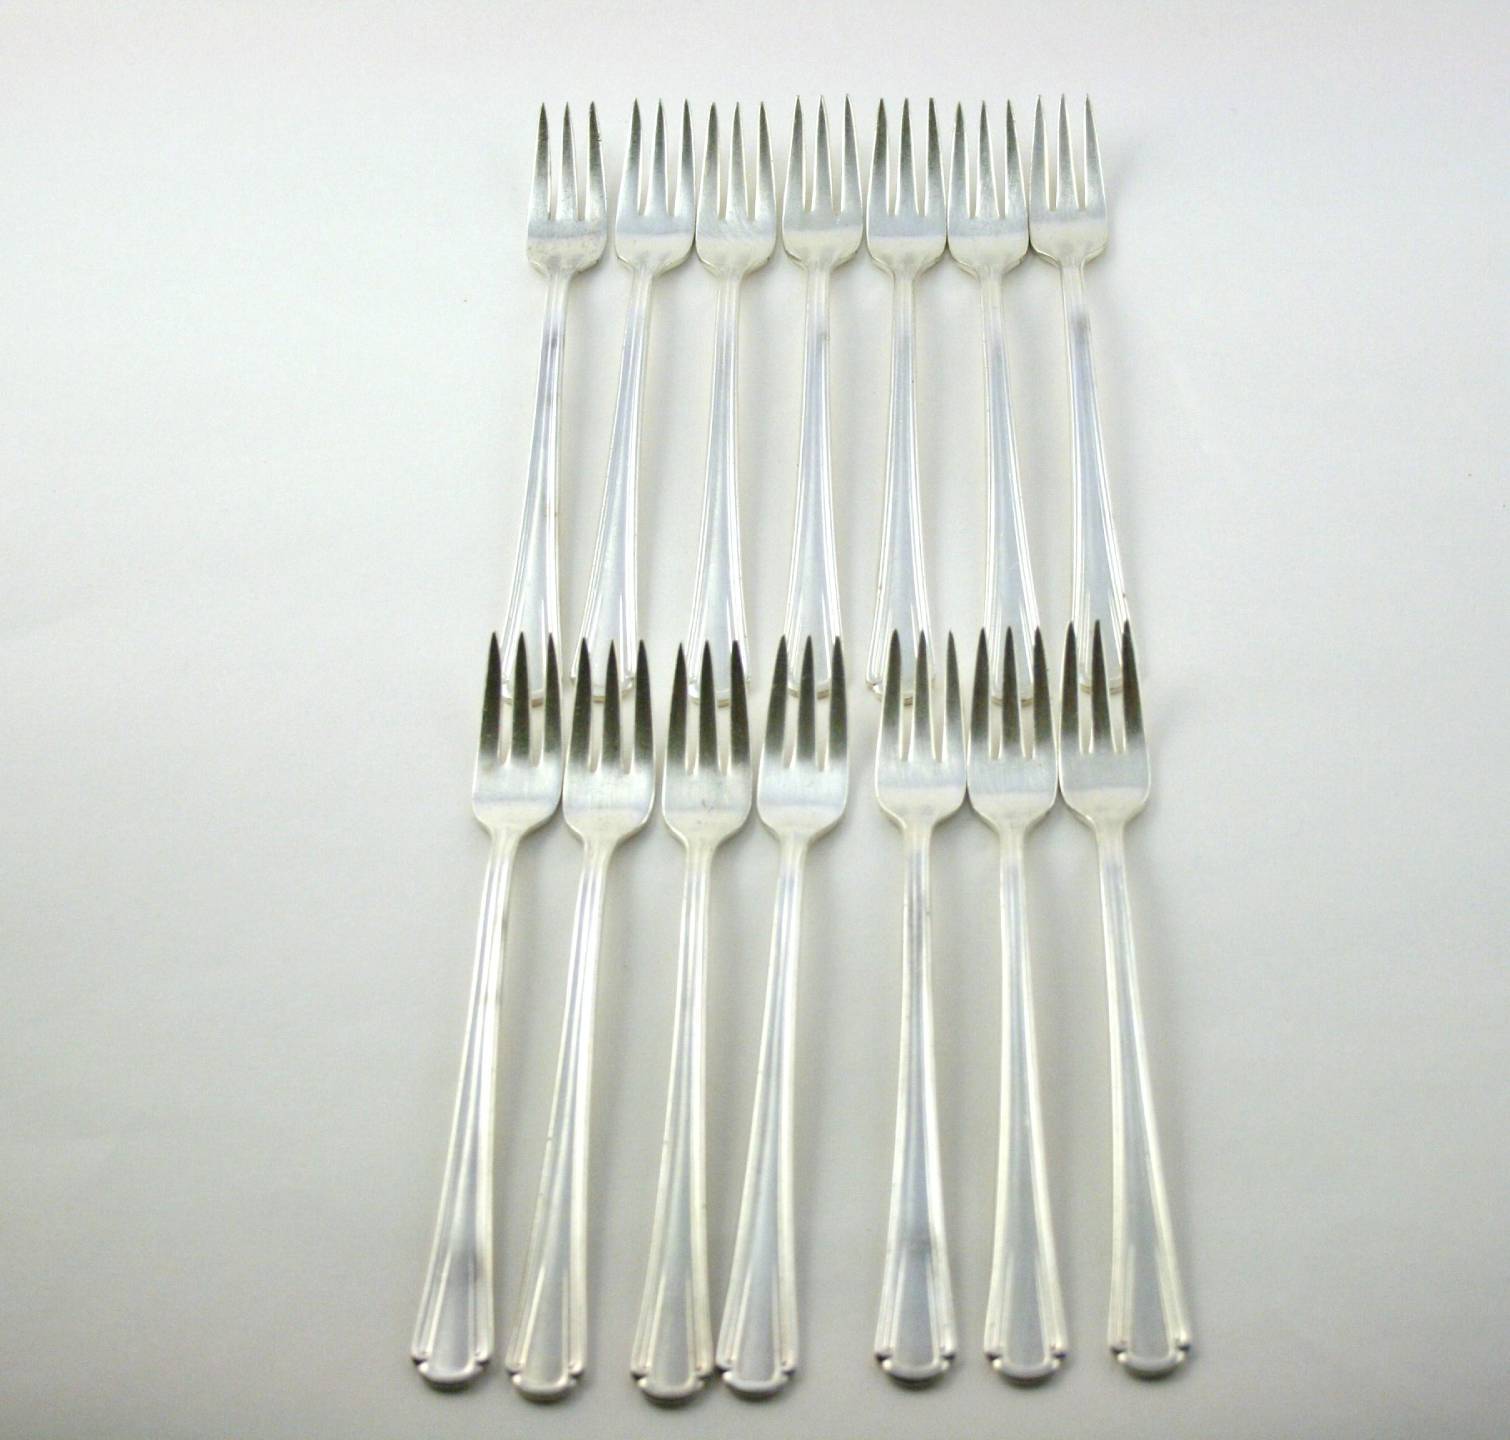 Primary image for Victors Co A1 International Silverplate Cocktail Seafood Forks Set of 14   #1447